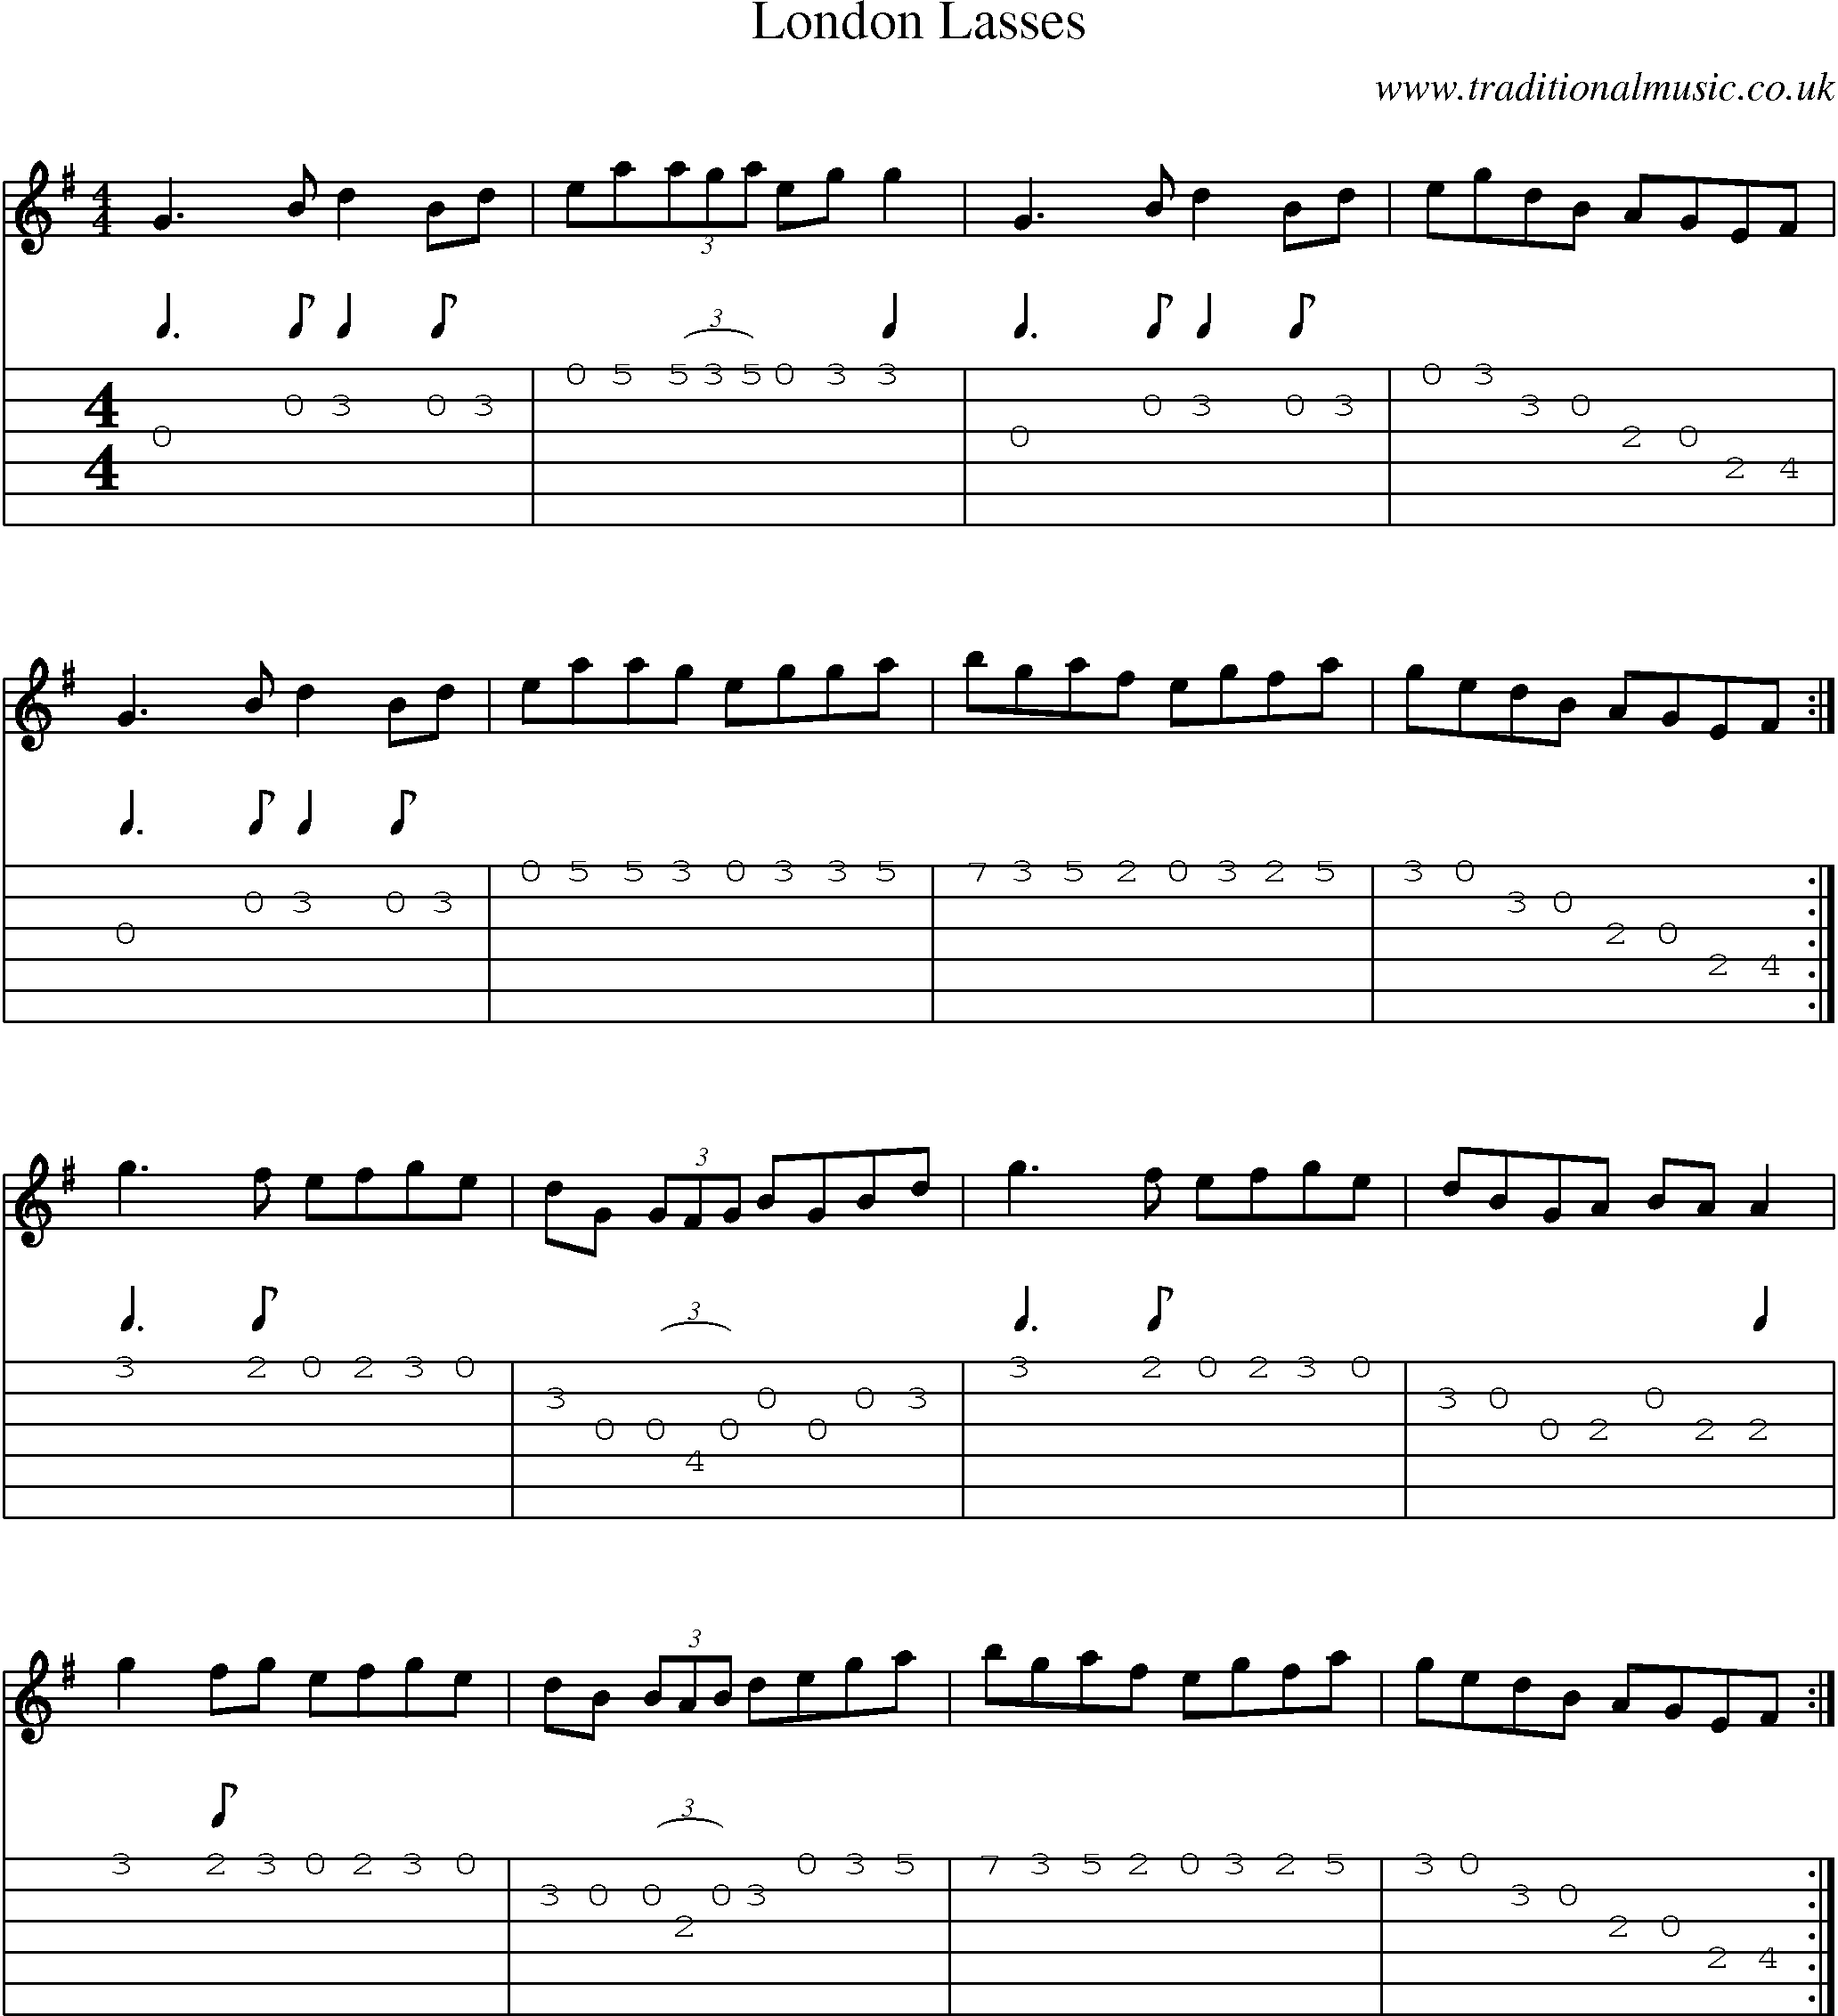 Music Score and Guitar Tabs for London Lasses